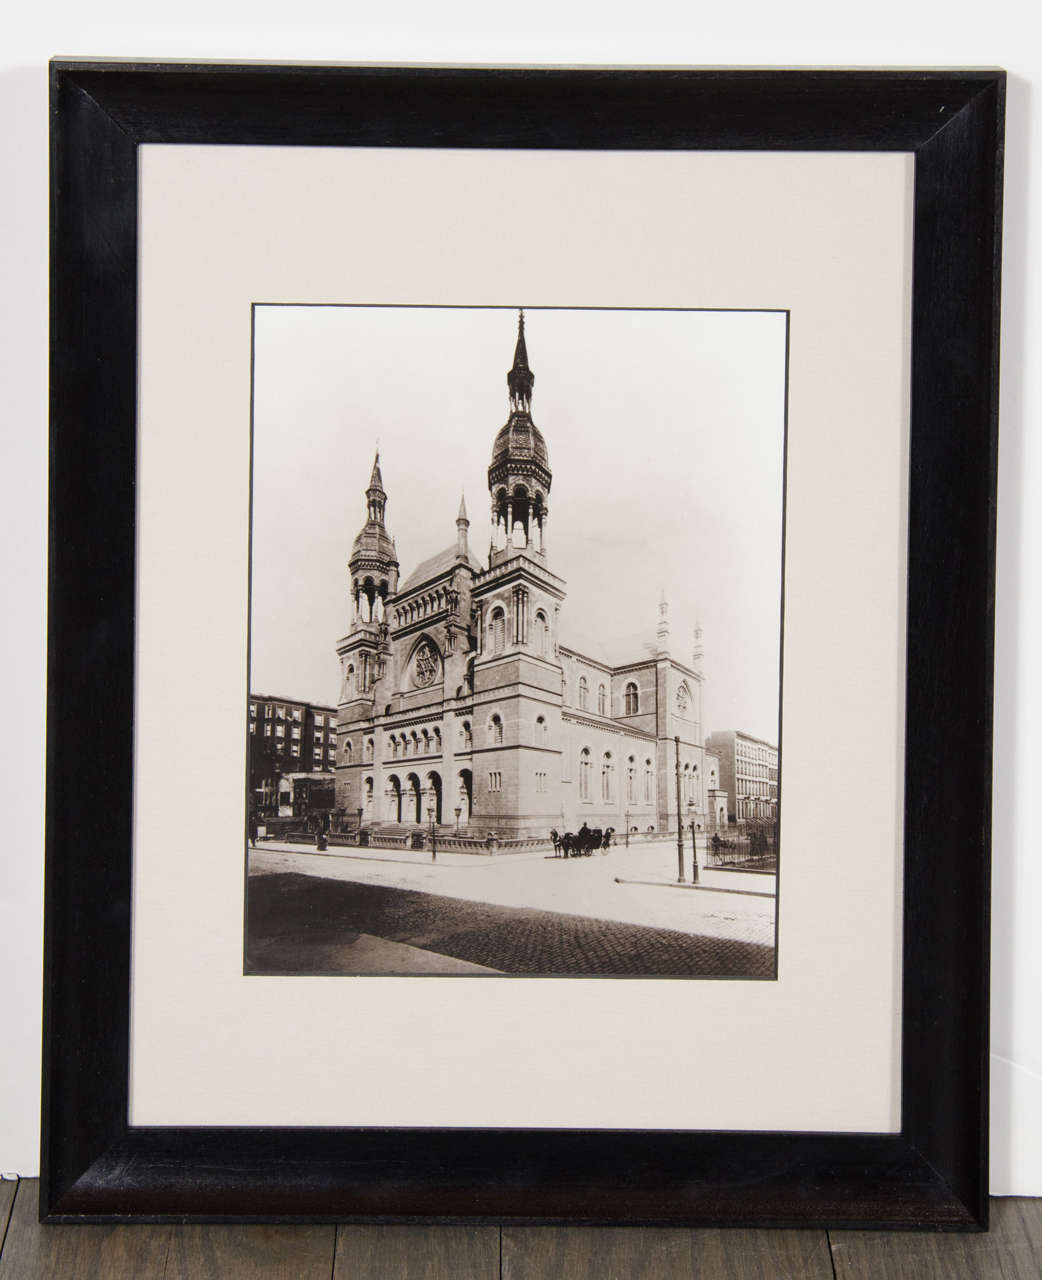 This early 20th century silver gelatin print depicts the iconic New York institution, Temple Emanu-El at its original location at 5th avenue and 43rd street in Manhattan, before it moved uptown to its present location at 5th avenue and 63rd street.